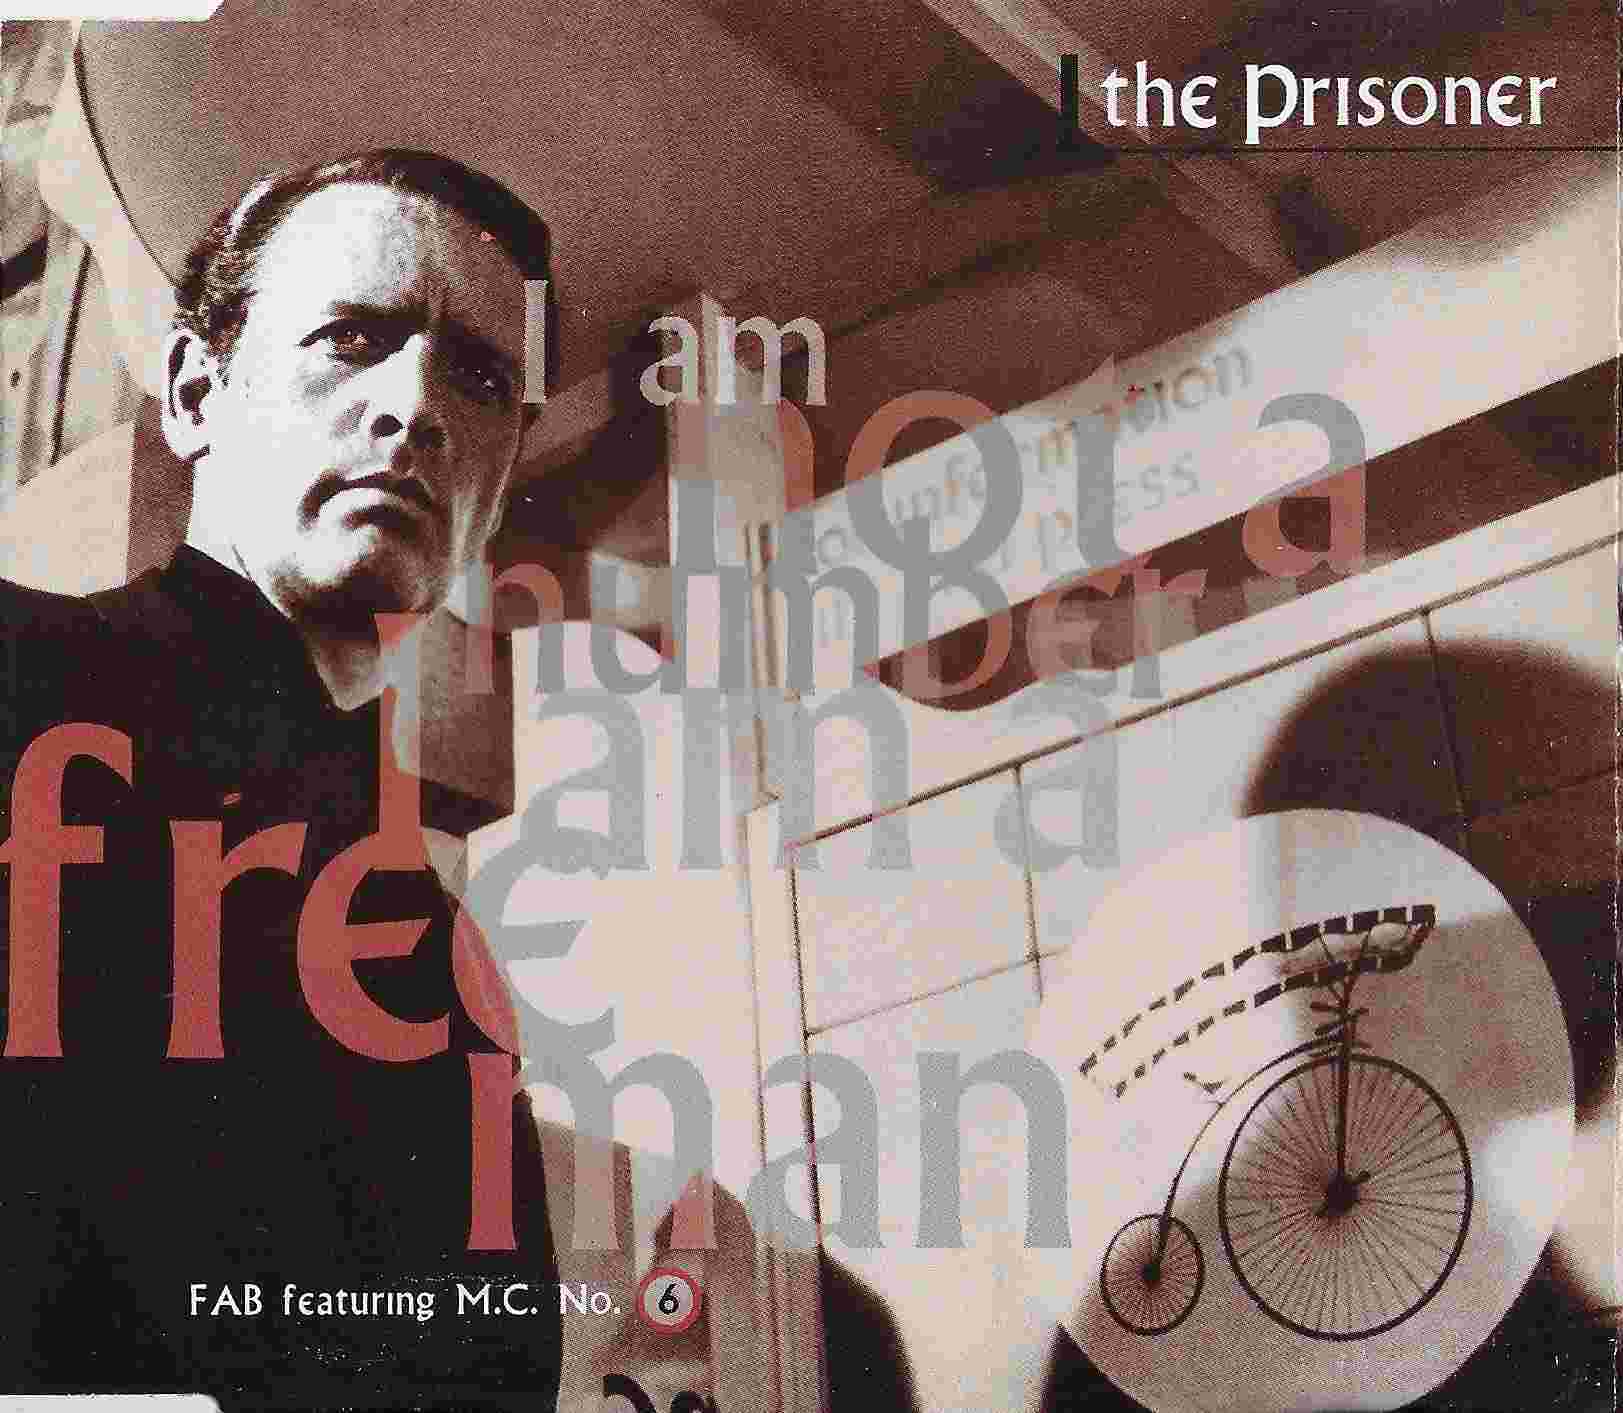 Picture of FAB CD 6 The prisoner (Free man mix) by artist Ron Grainer / F. A. B. from ITV, Channel 4 and Channel 5 library